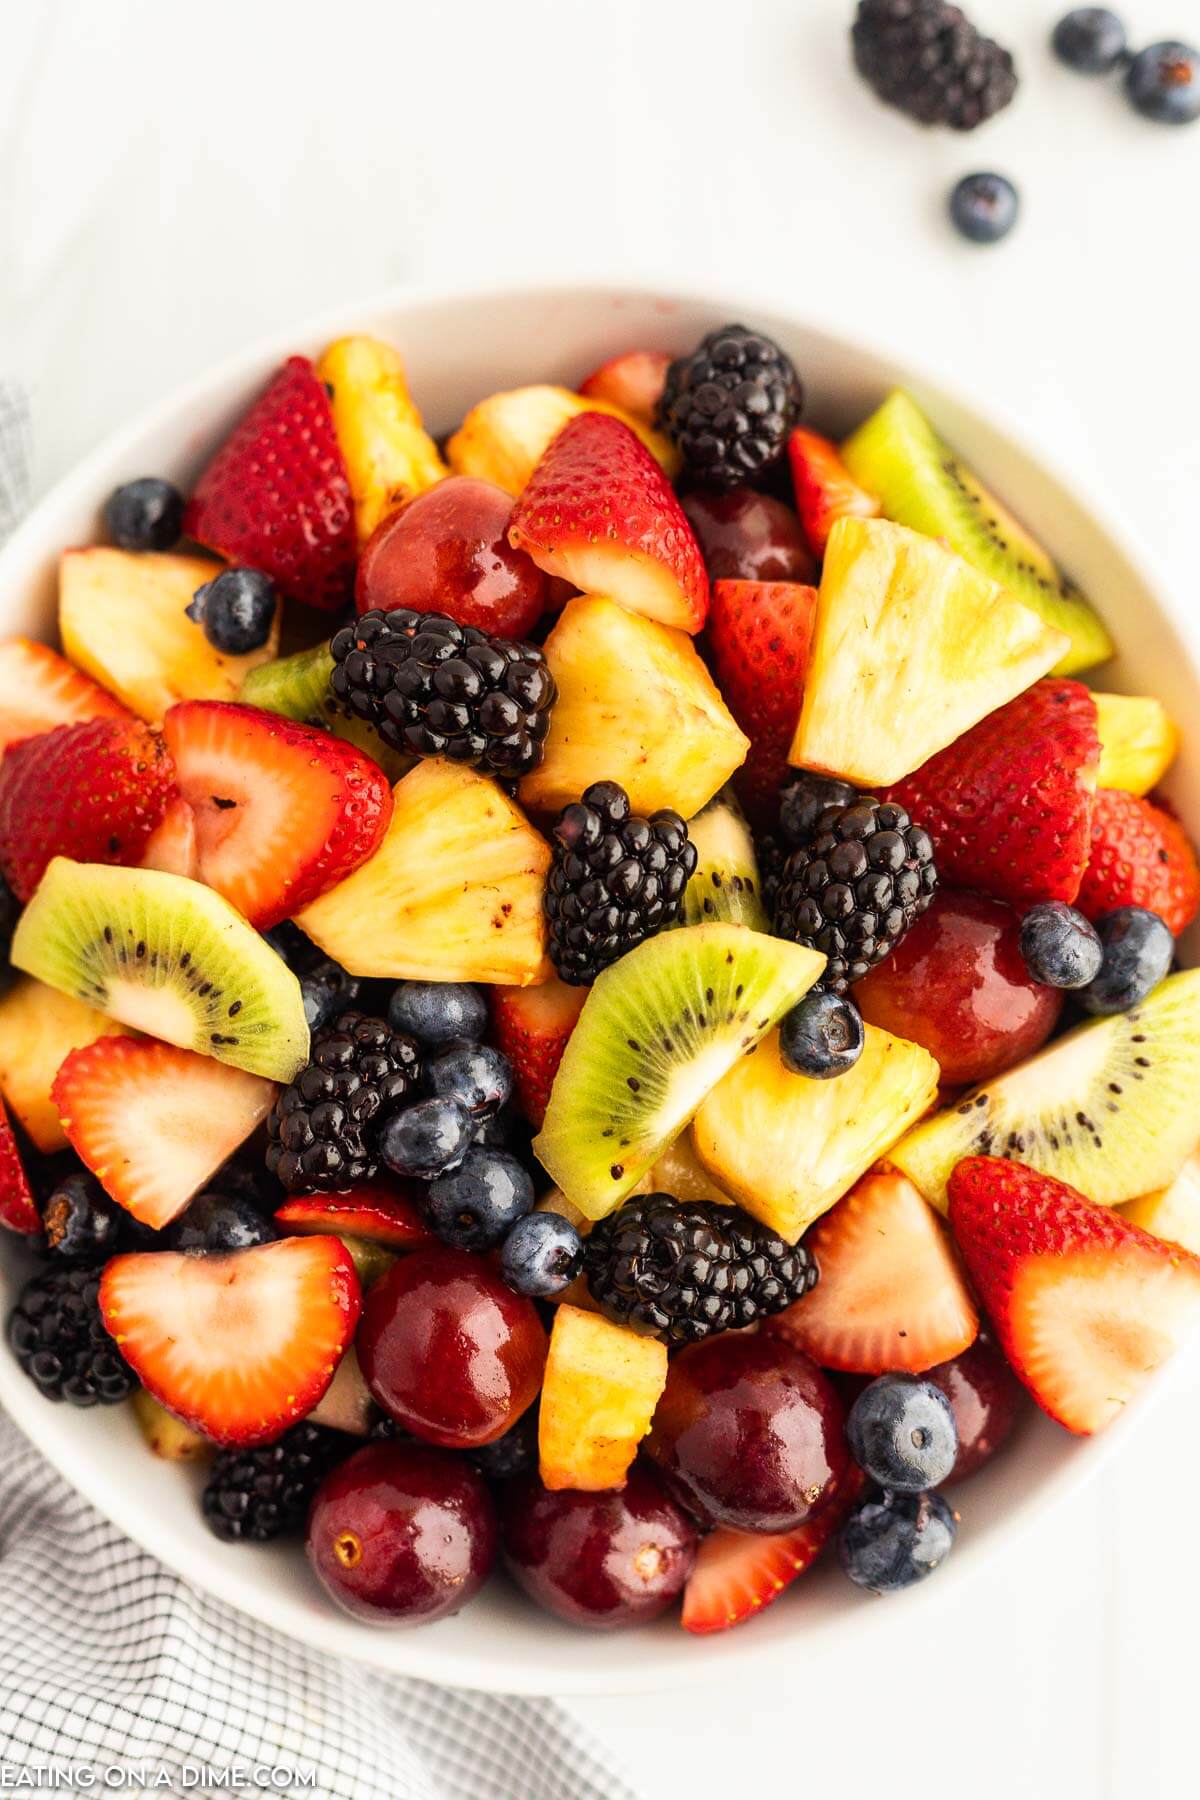 The 7 Best Fruit Bowls Of 2023